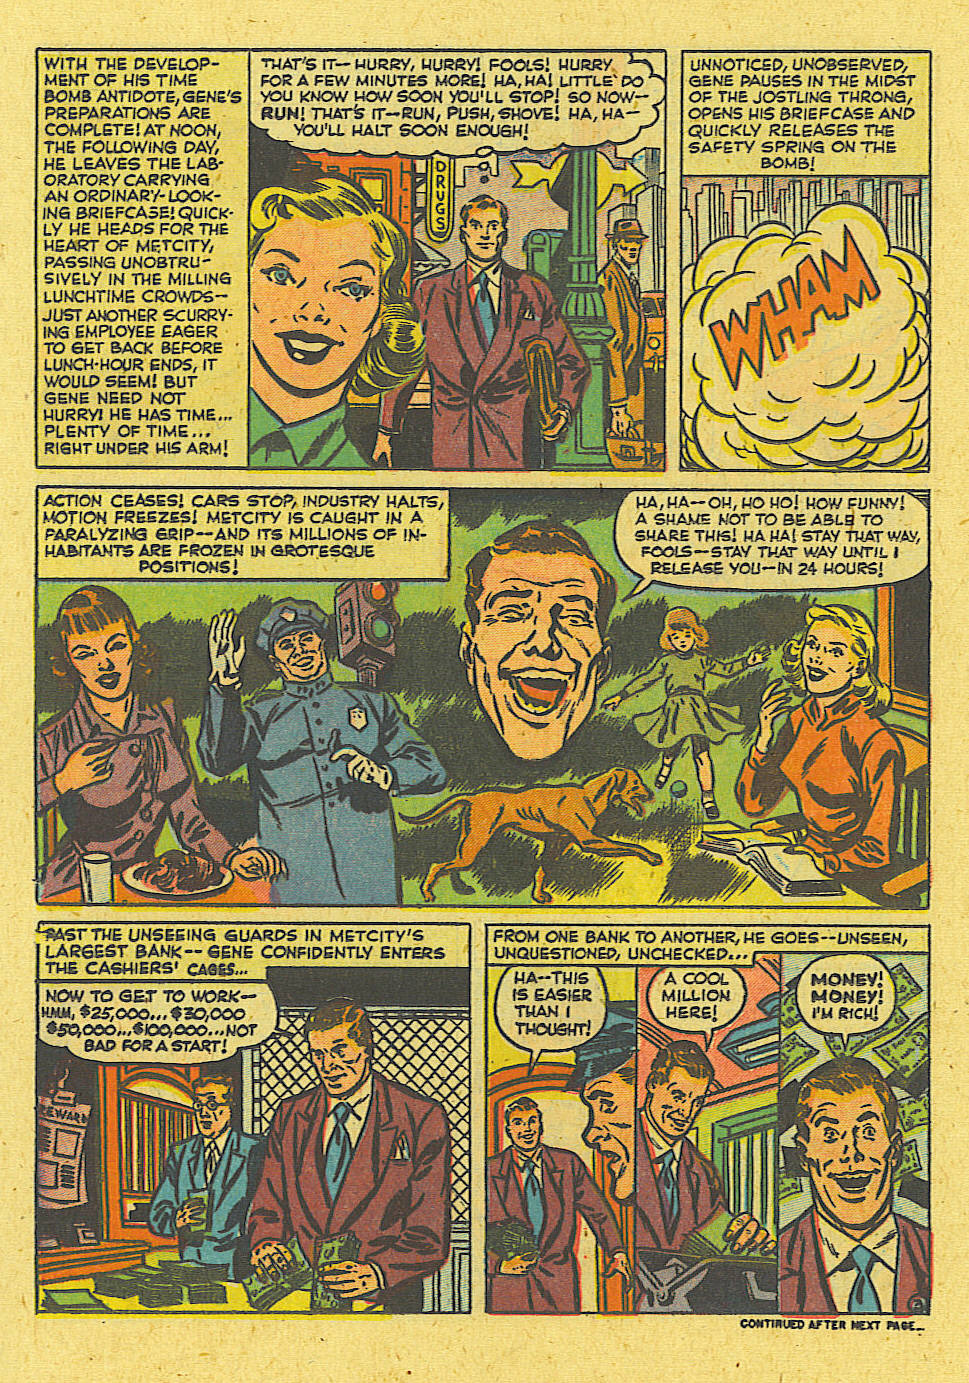 Marvel Tales (1949) 103 Page 8